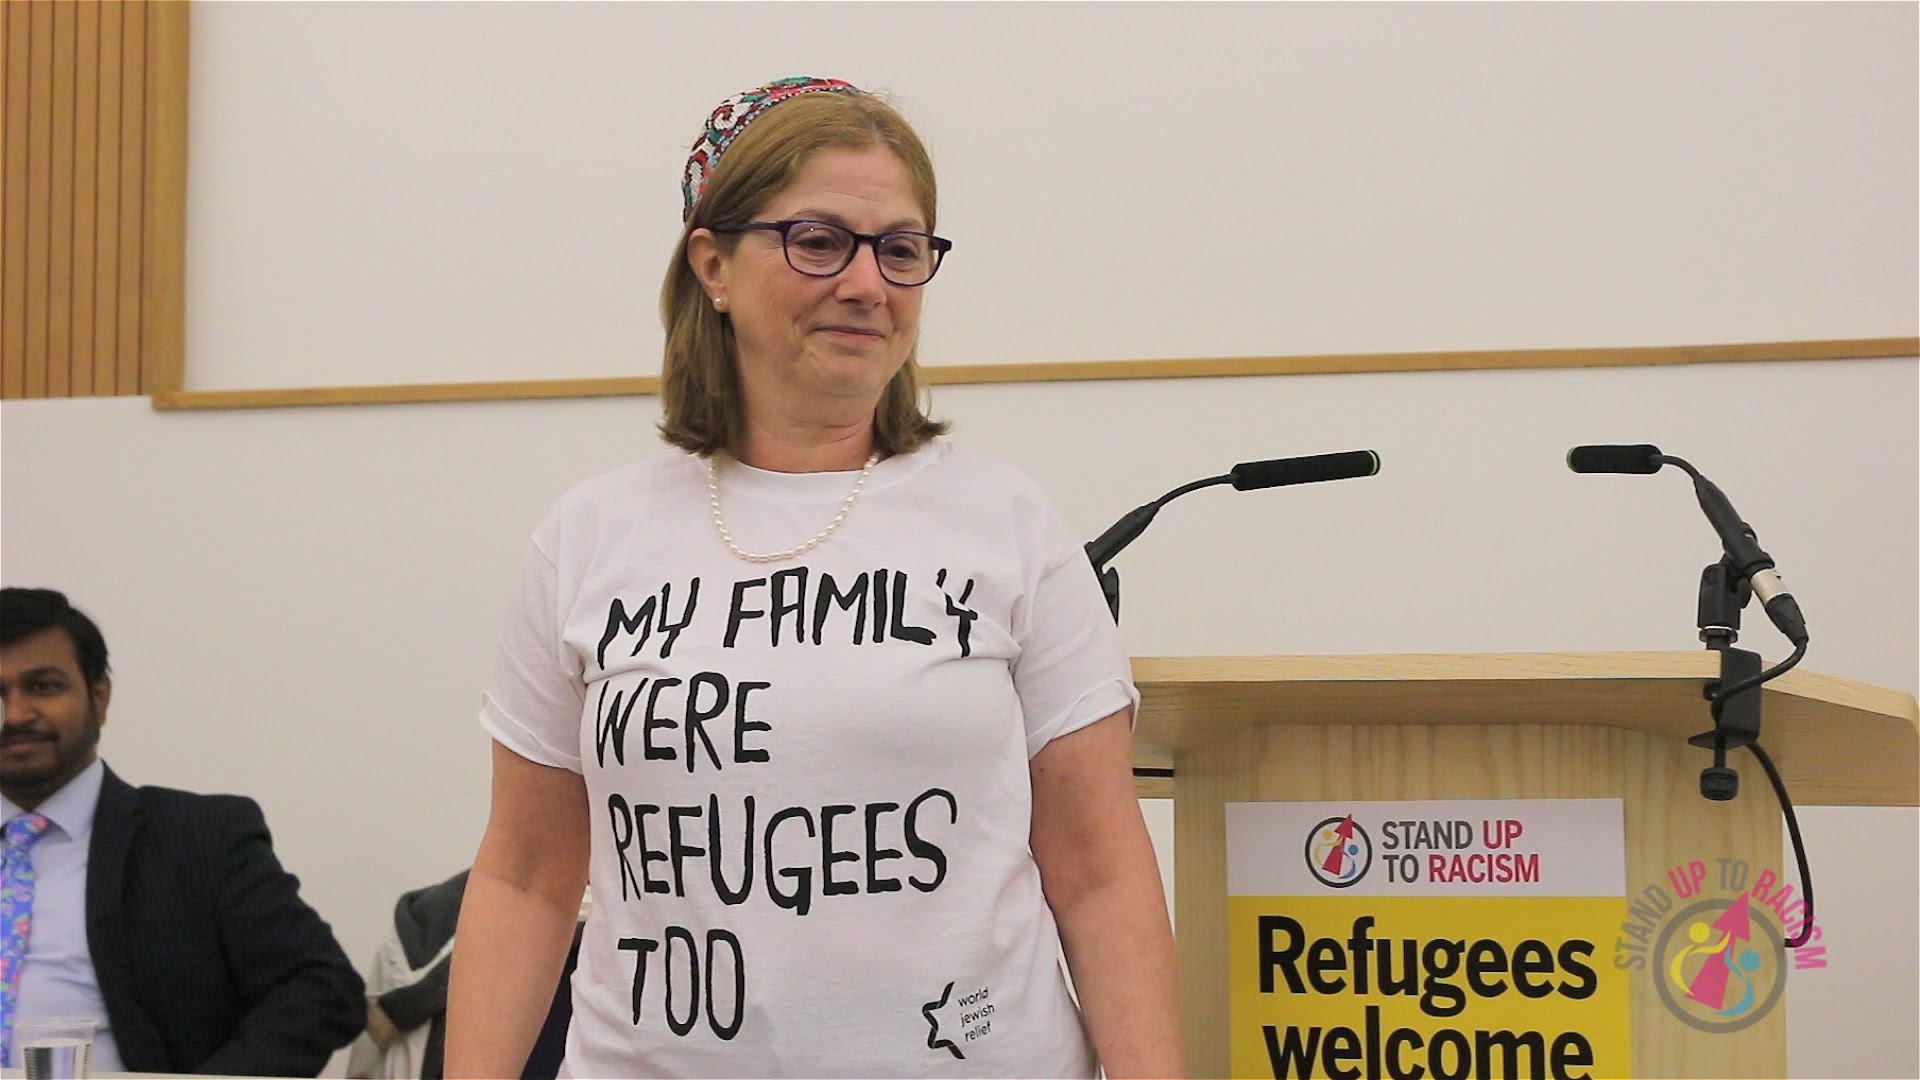 “My family were refugees too”: Rabbi Lee Wax stands up to racism